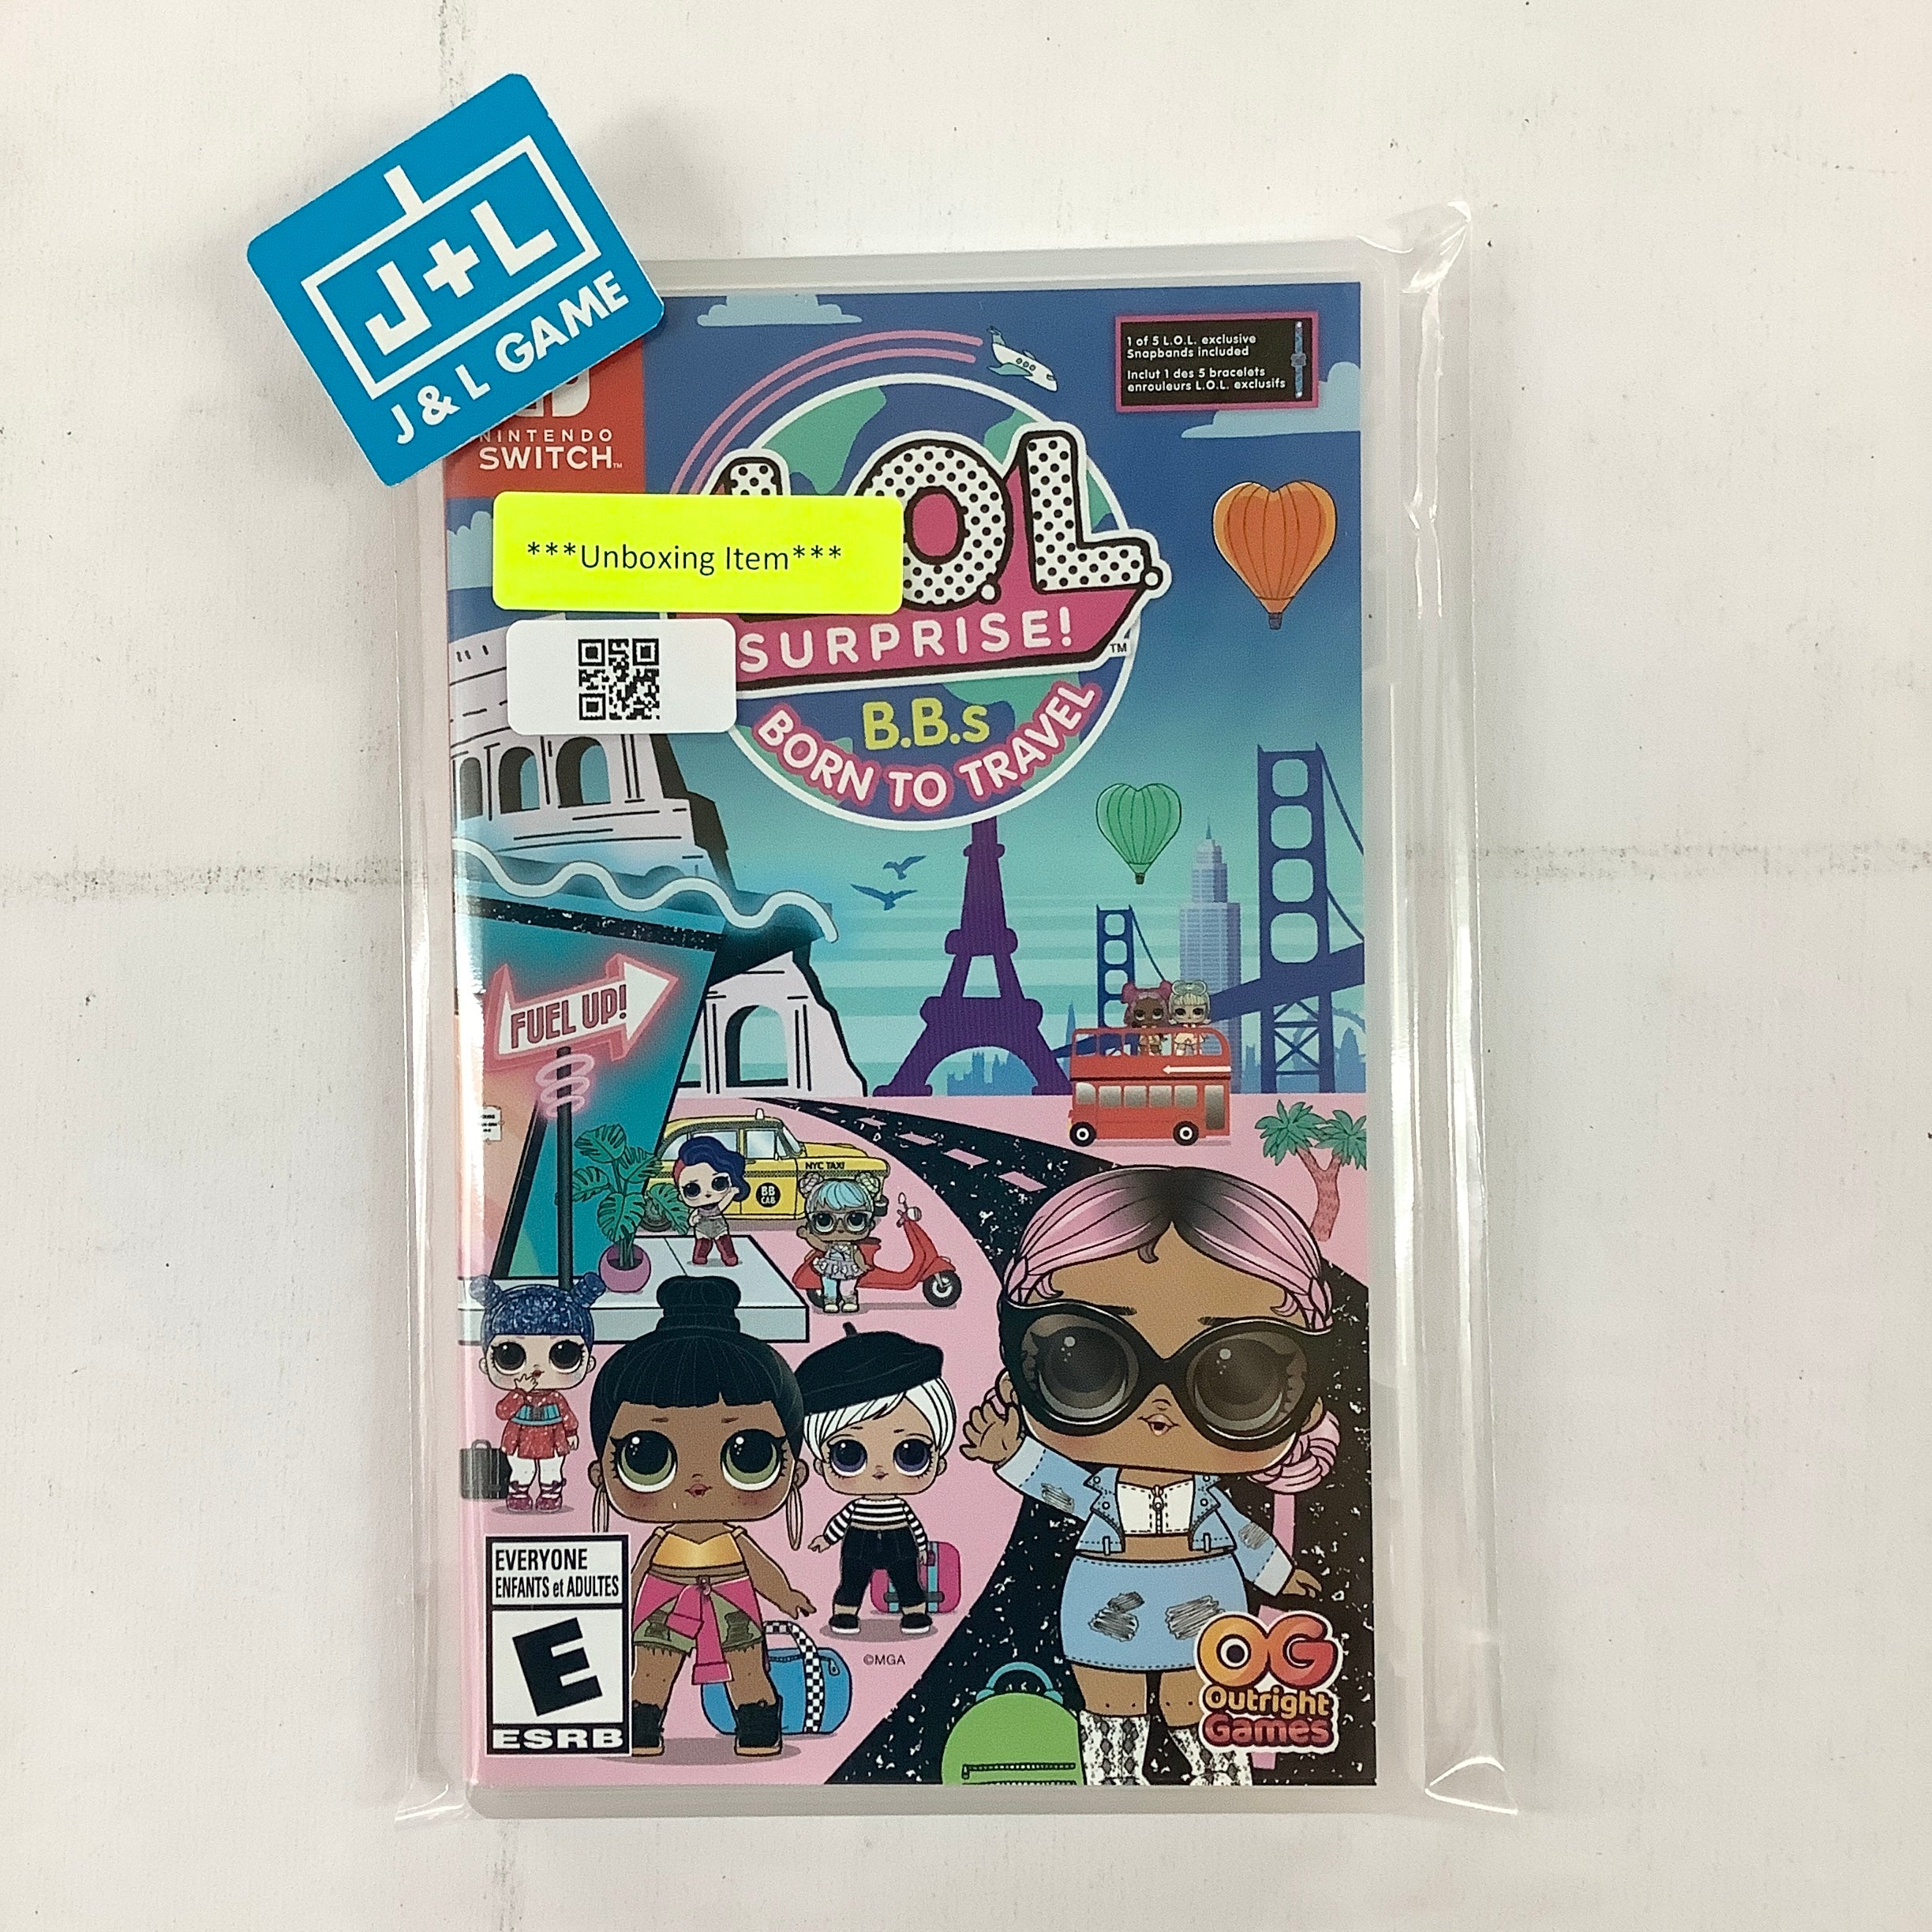 L.O.L. Surprise! B.B.s Born to Travel - (NSW) Nintendo Switch [UNBOXING] Video Games Outright Games   